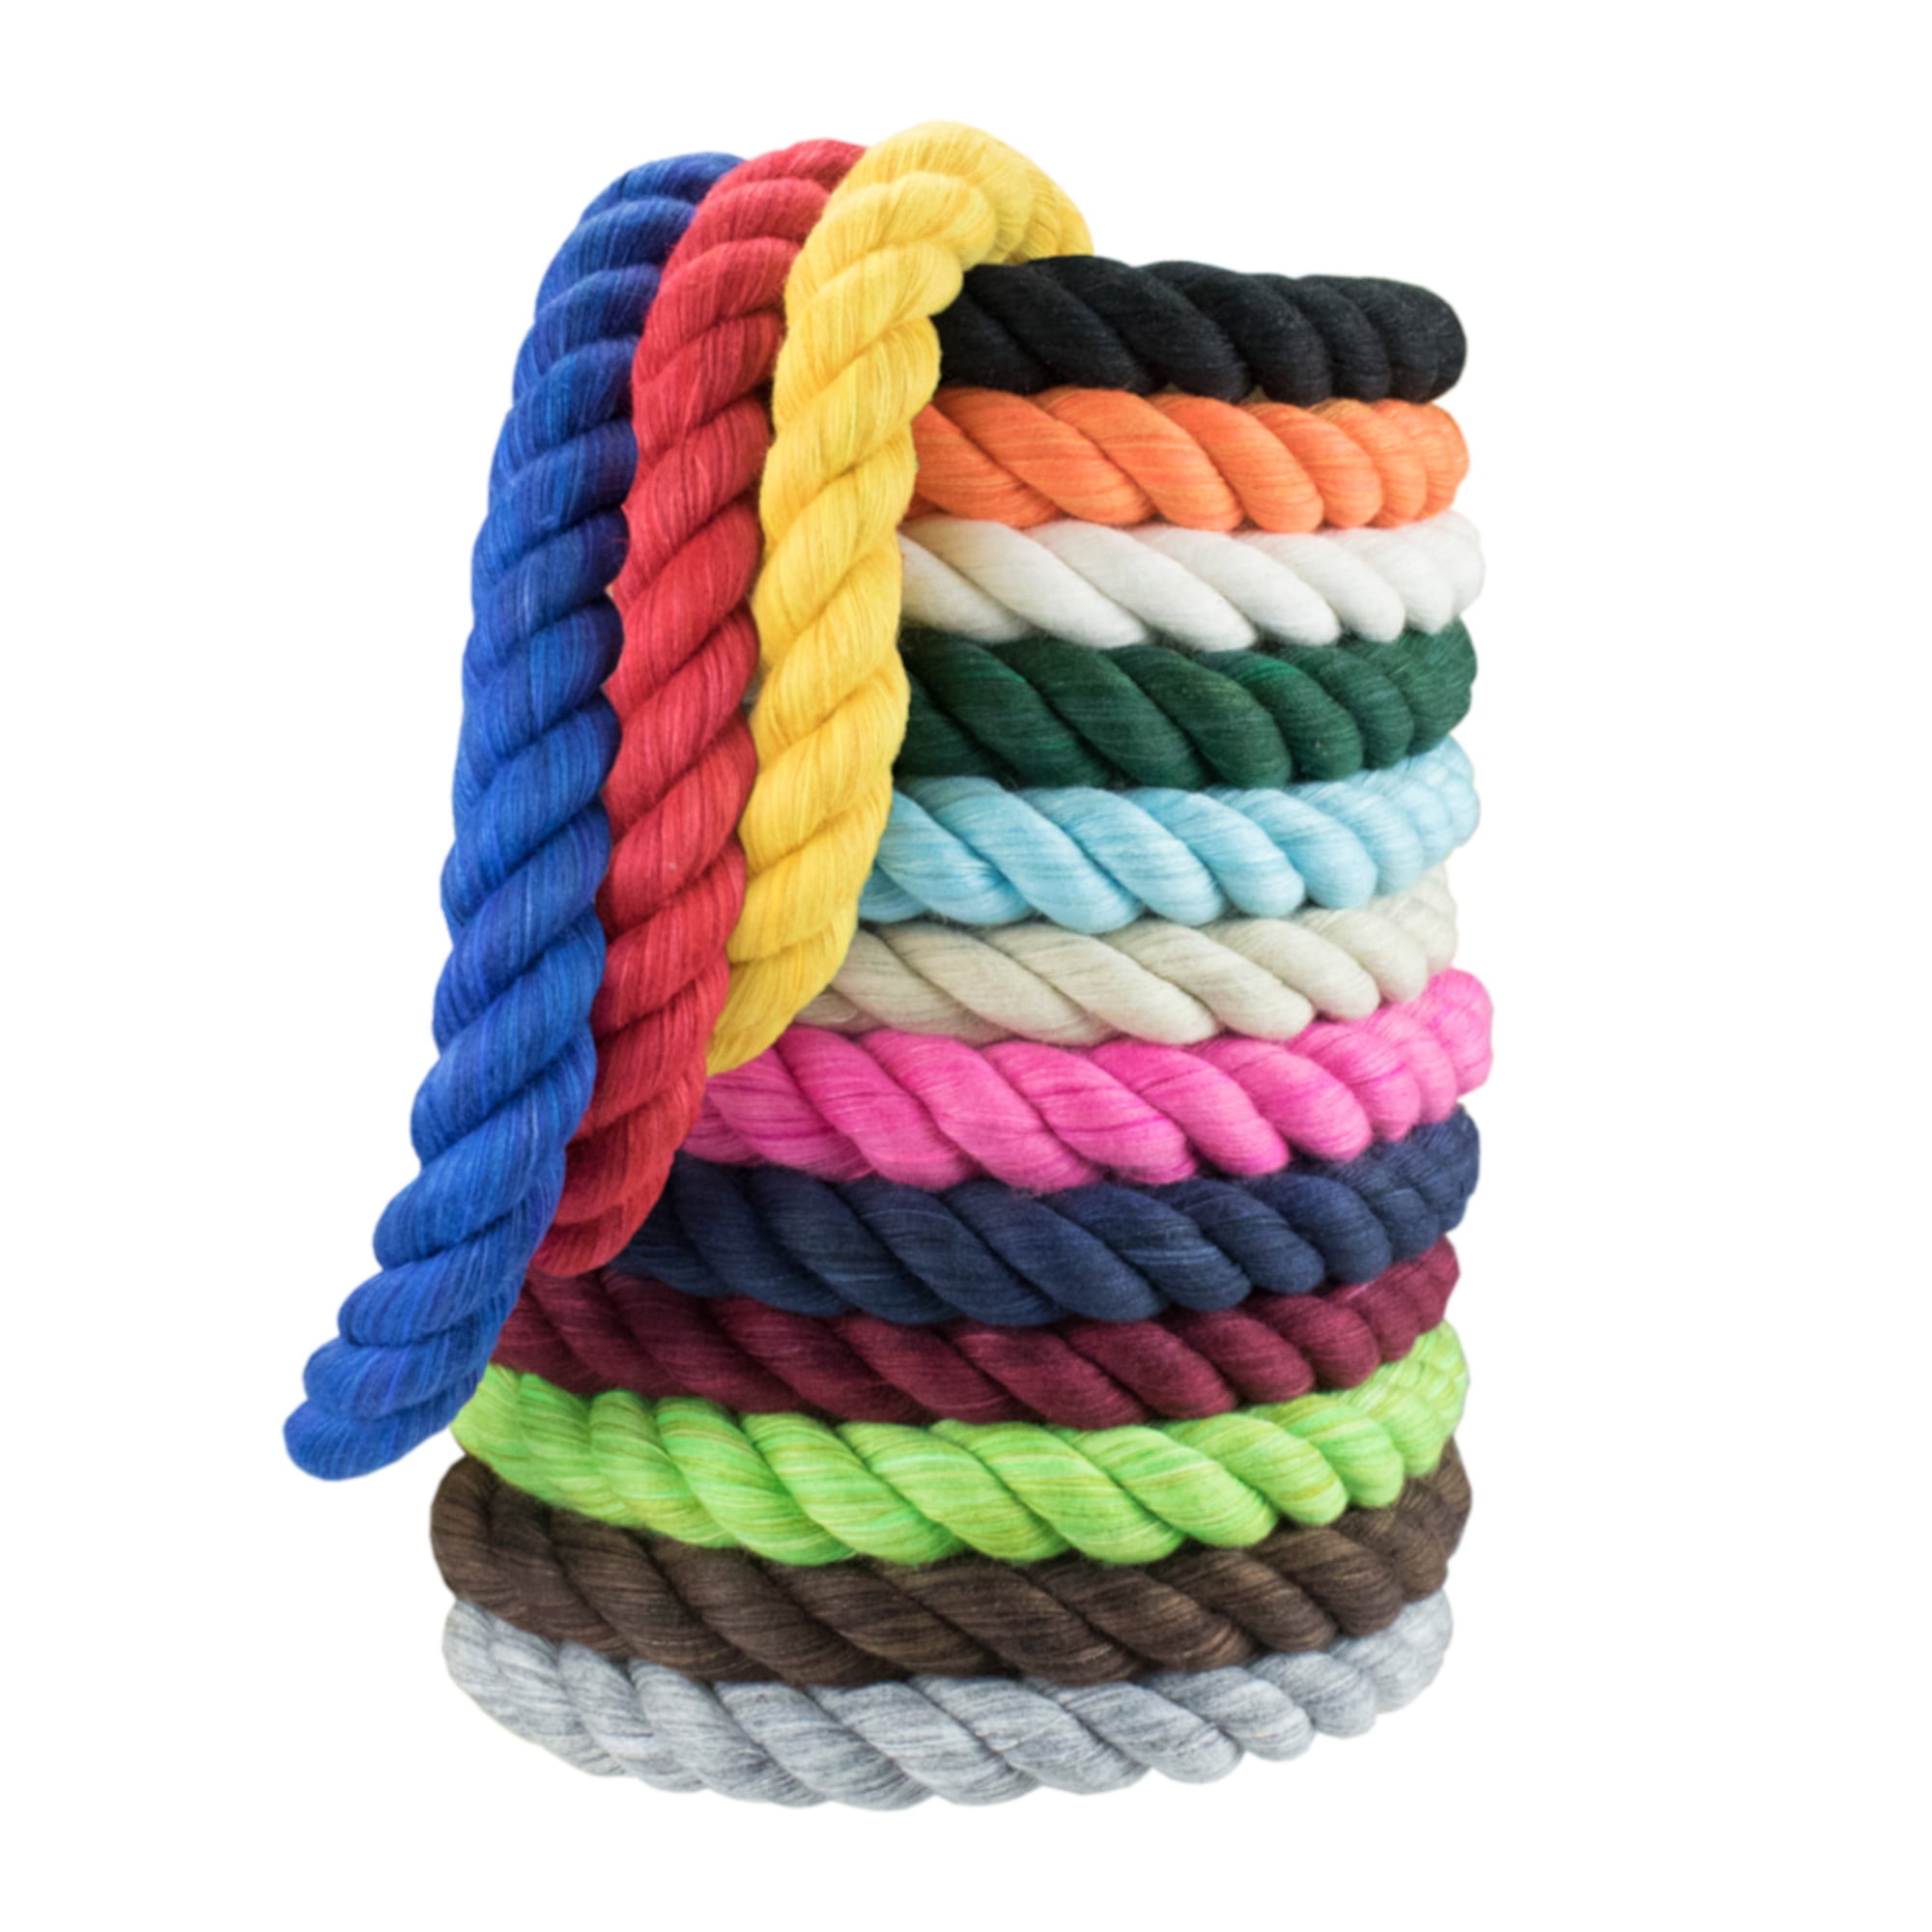 Wonderful and Durable Paracord Twisted Cotton Rope 1/4 x 25 Feet Cord Dog Toy Safe Navy Blue